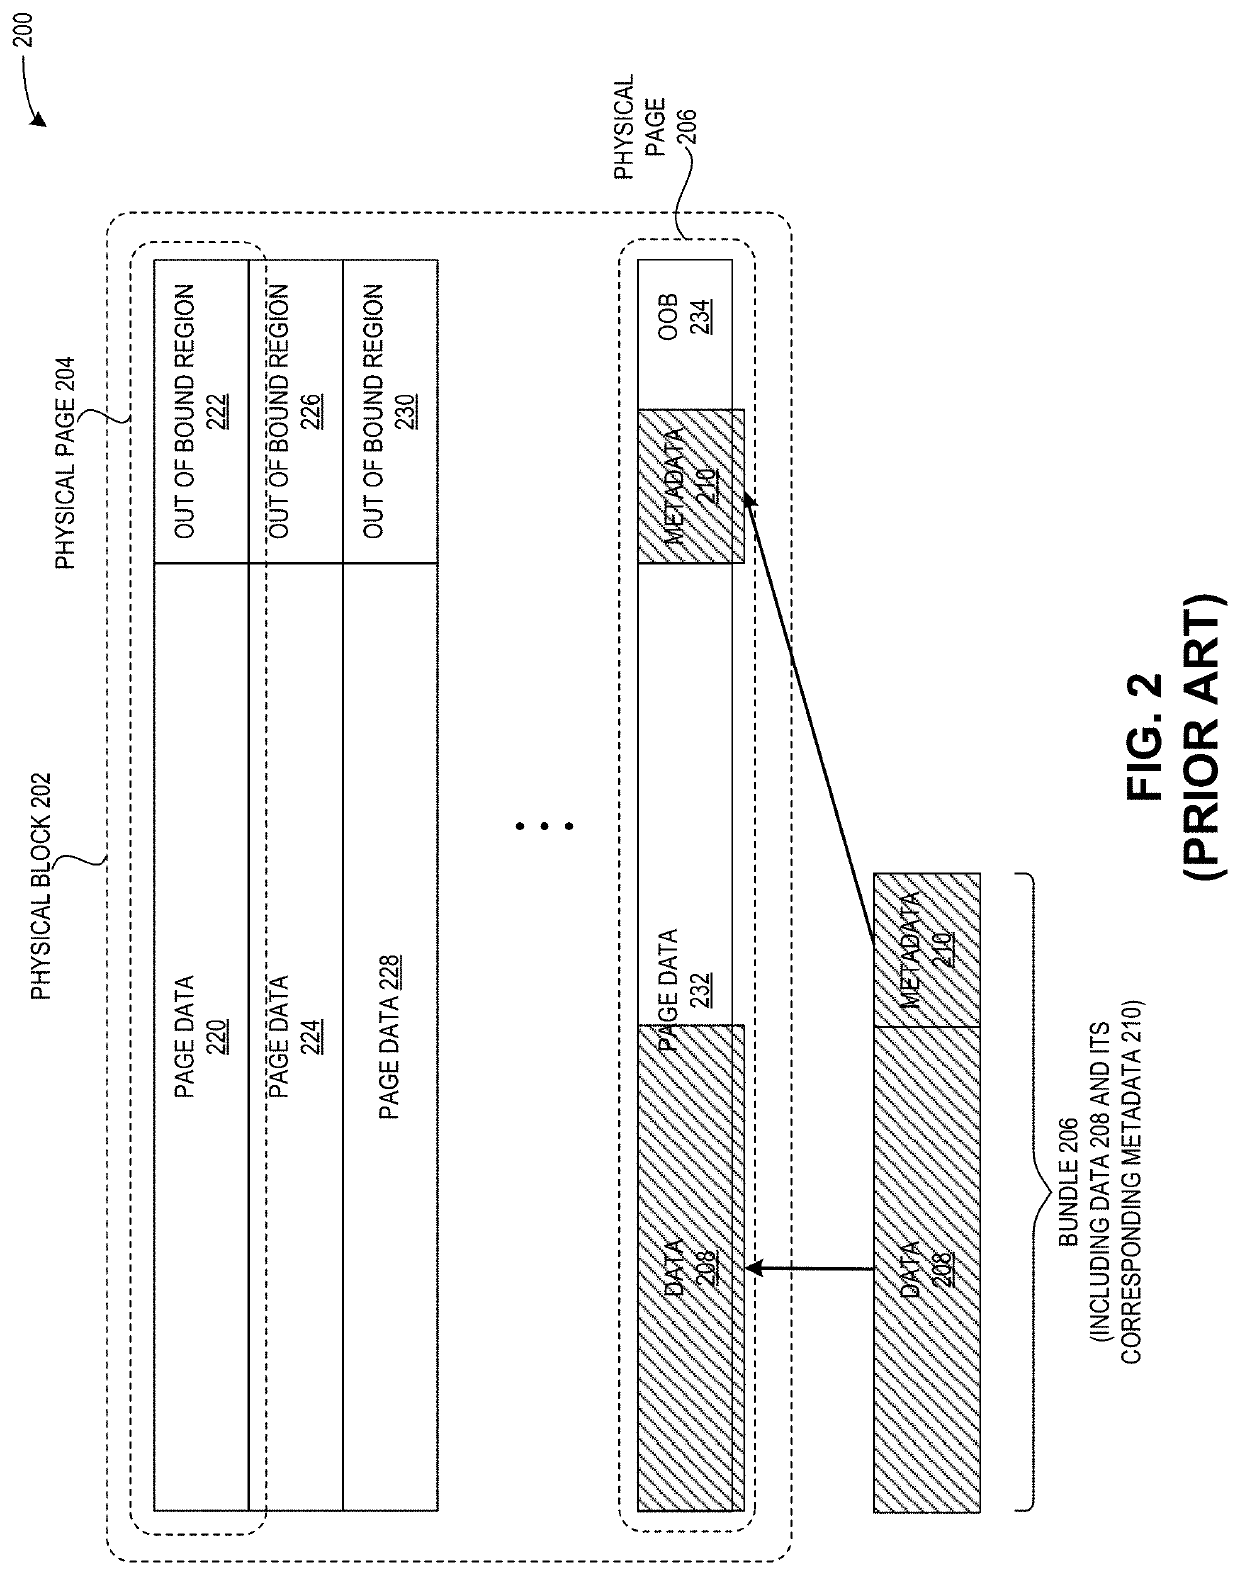 Method and system for facilitating atomicity assurance on metadata and data bundled storage